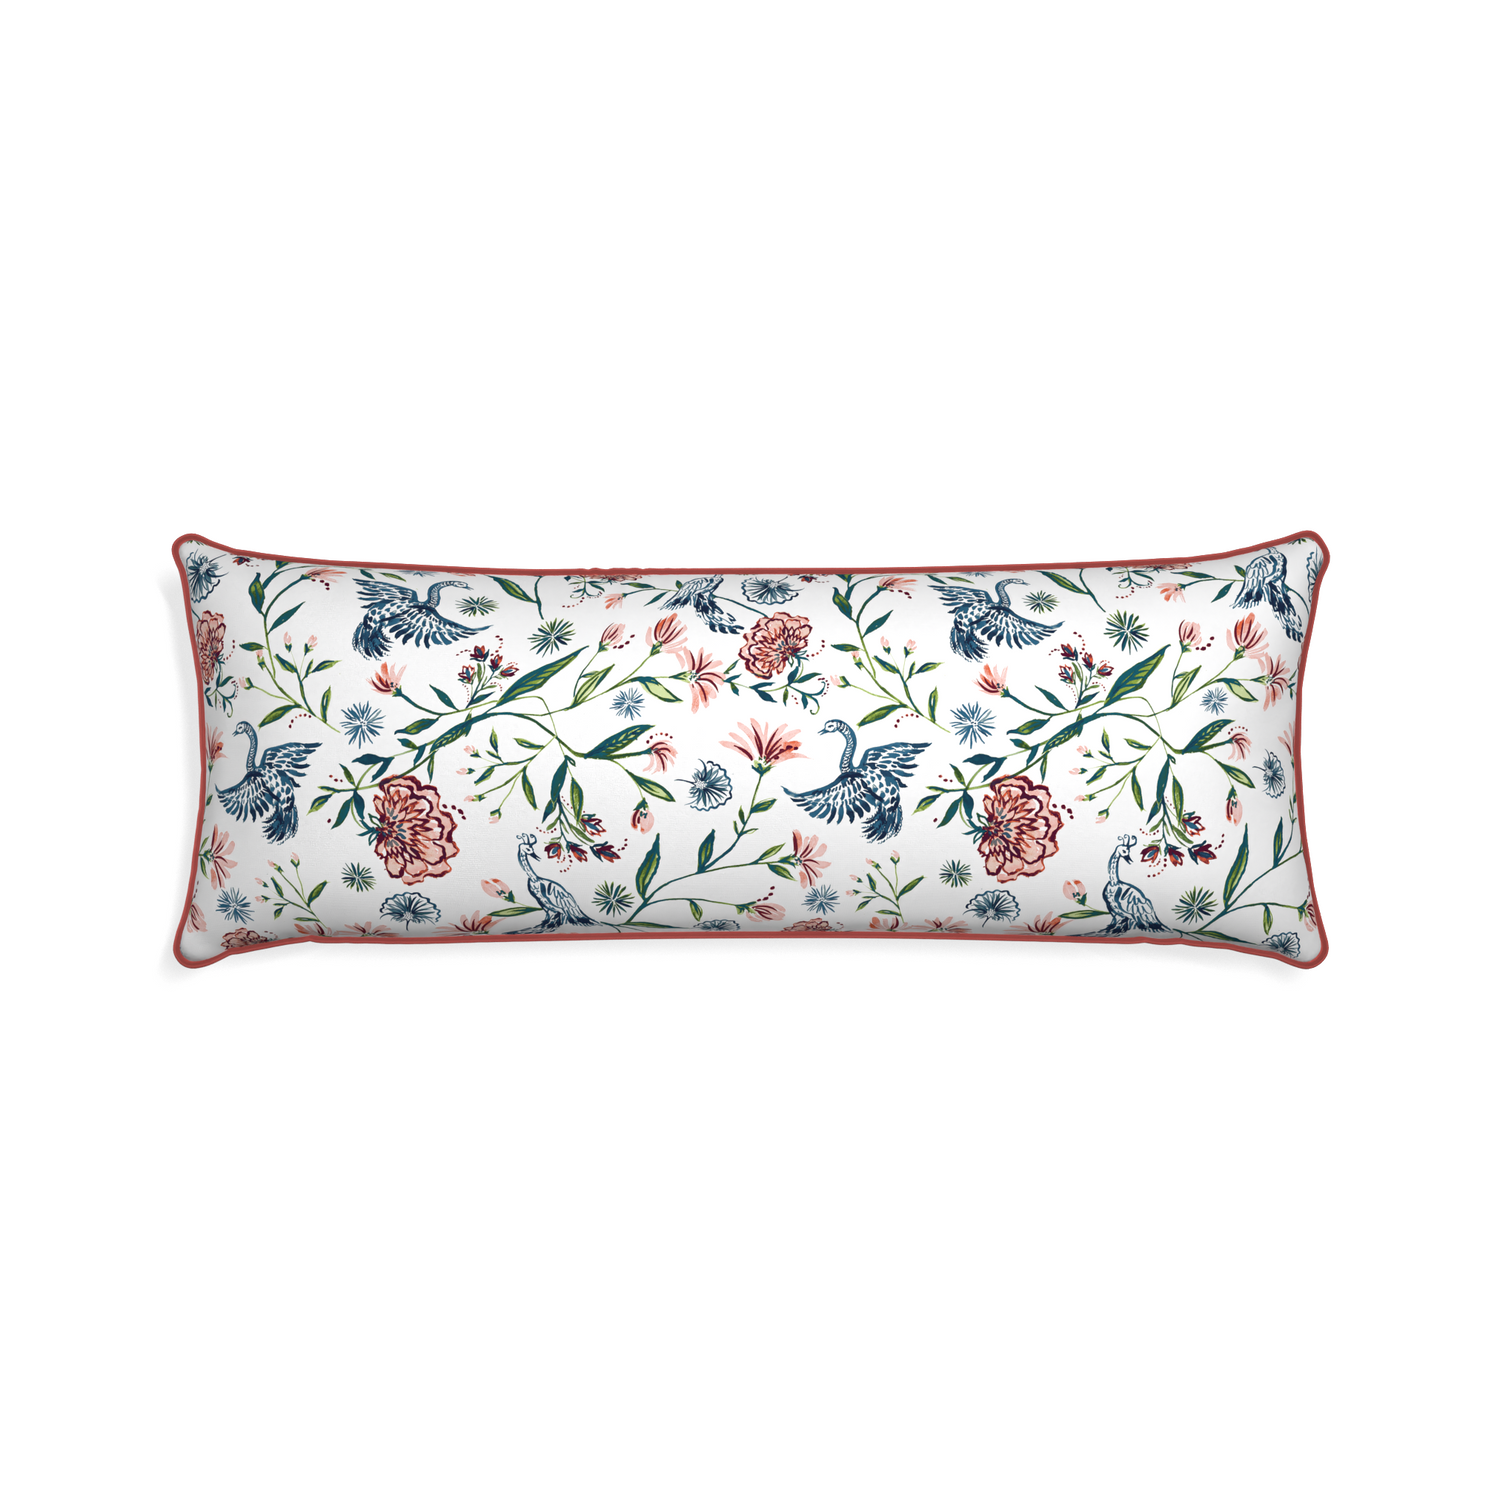 Xl-lumbar daphne cream custom pillow with c piping on white background